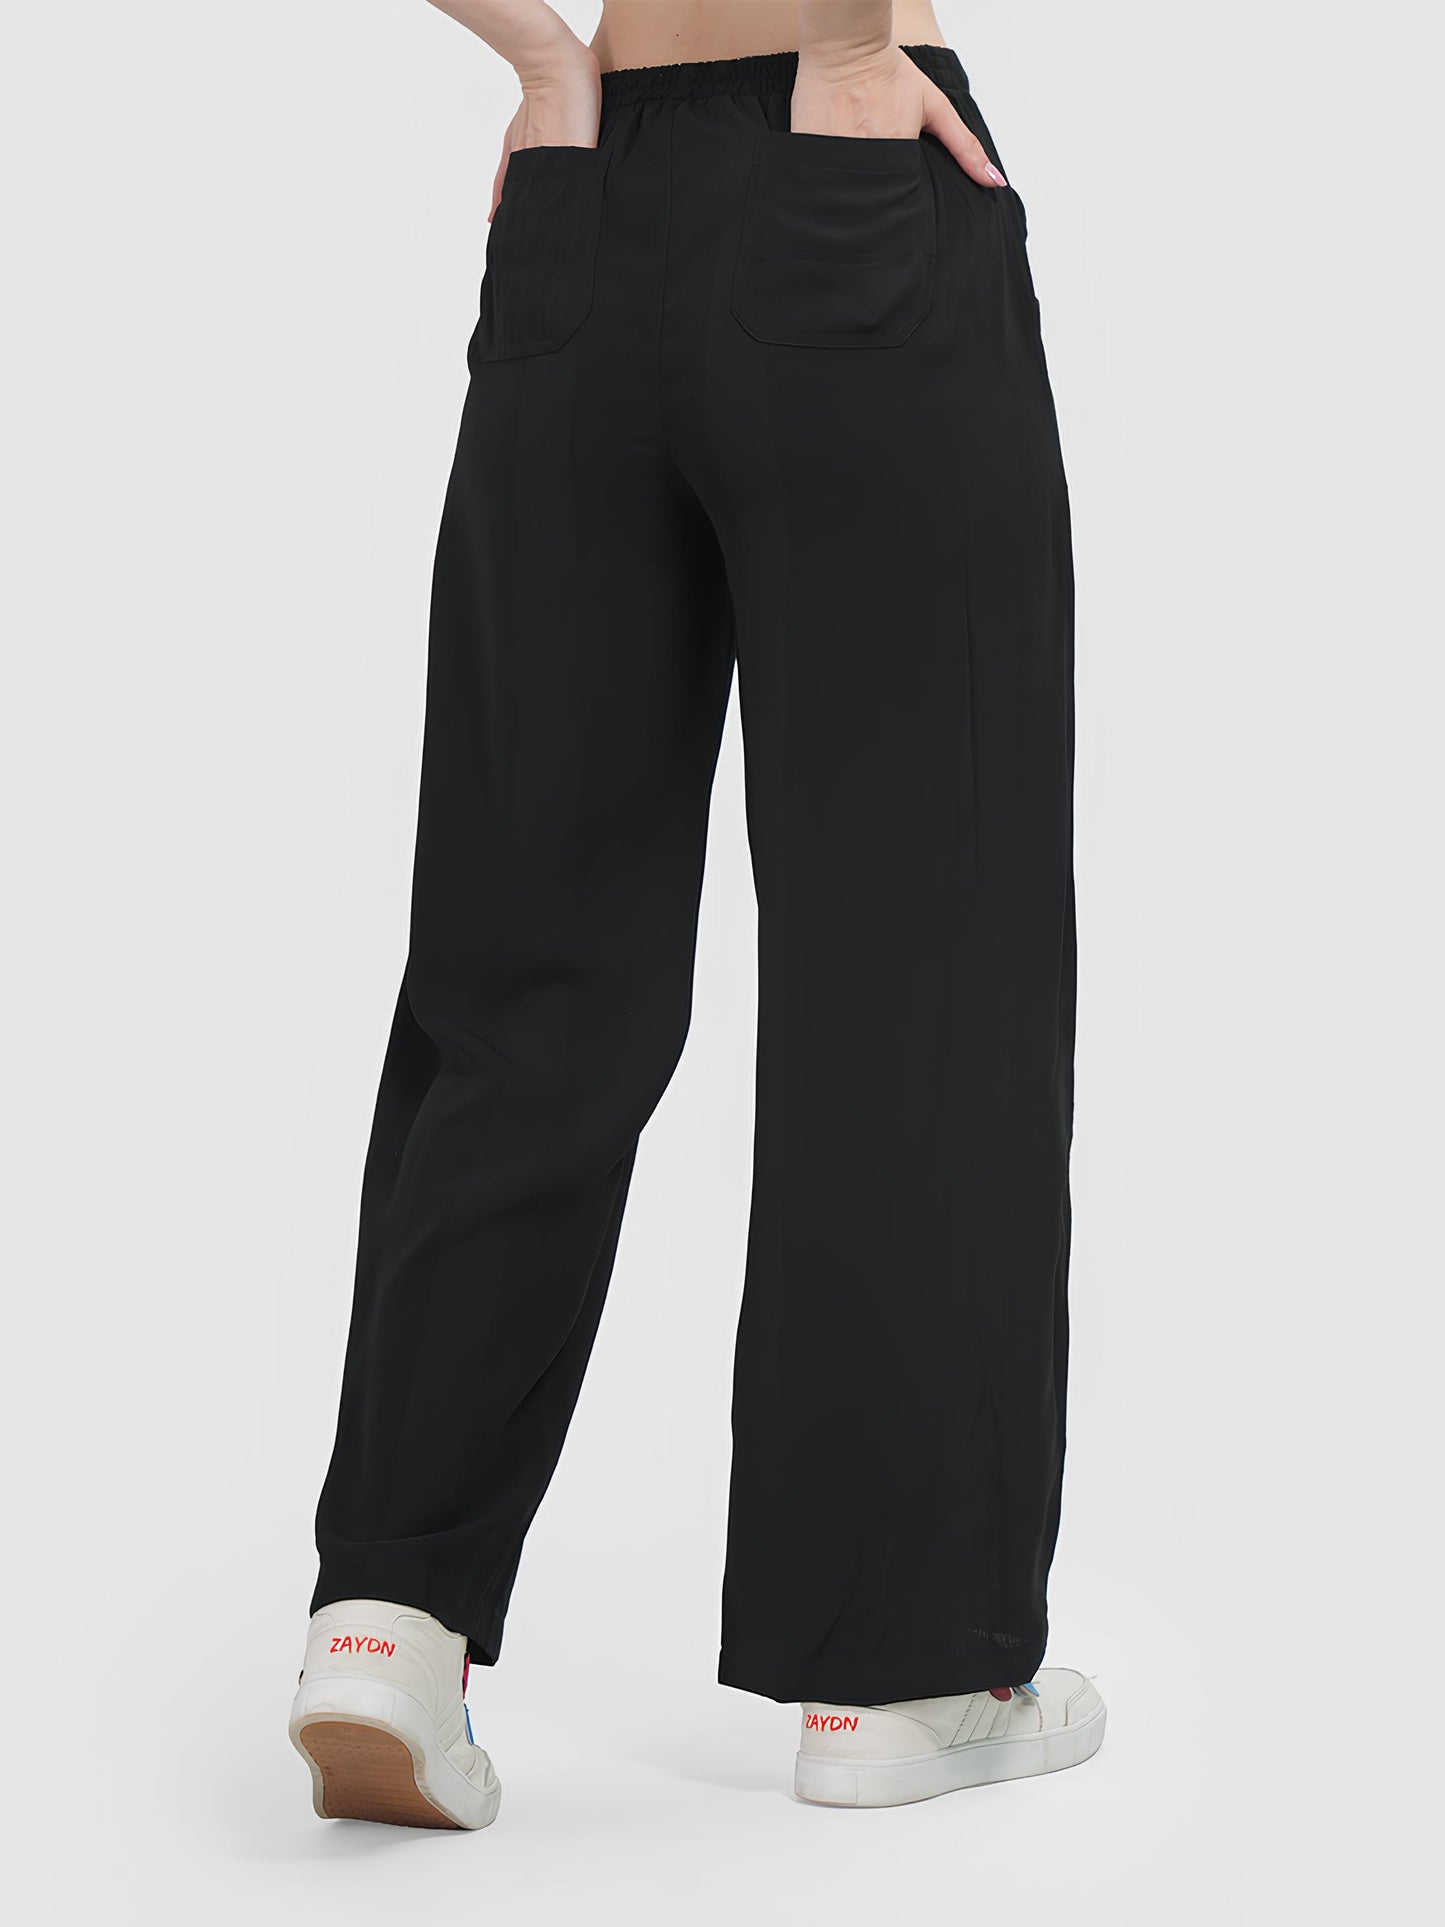 Black Colour | Women Formal Trousers Regular Fit Being Flawless